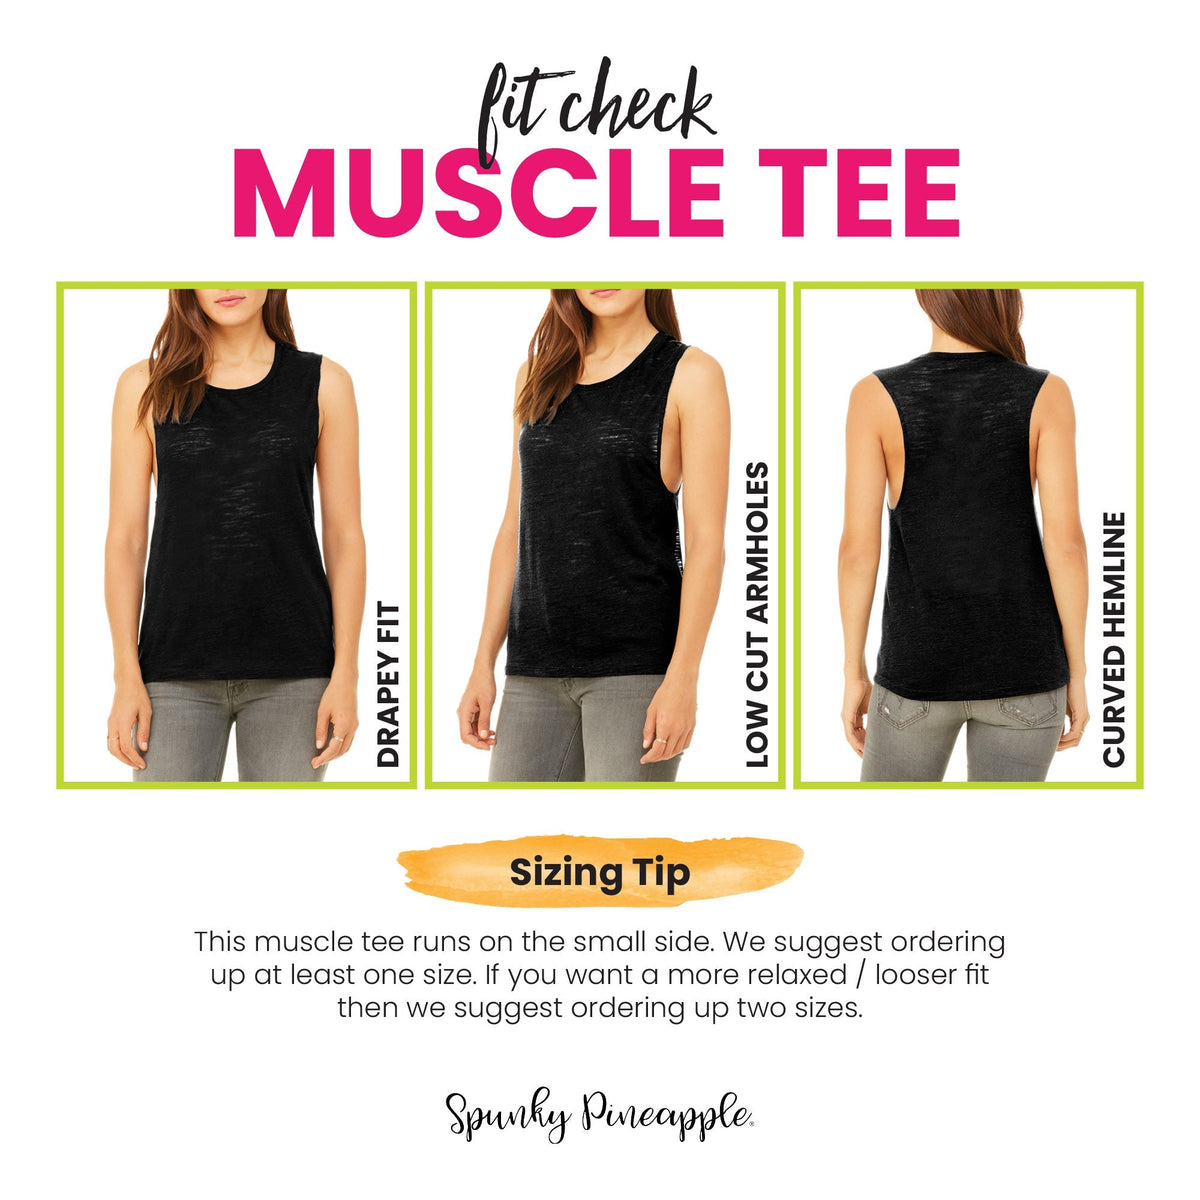 Let's Get Jacked Muscle Tee